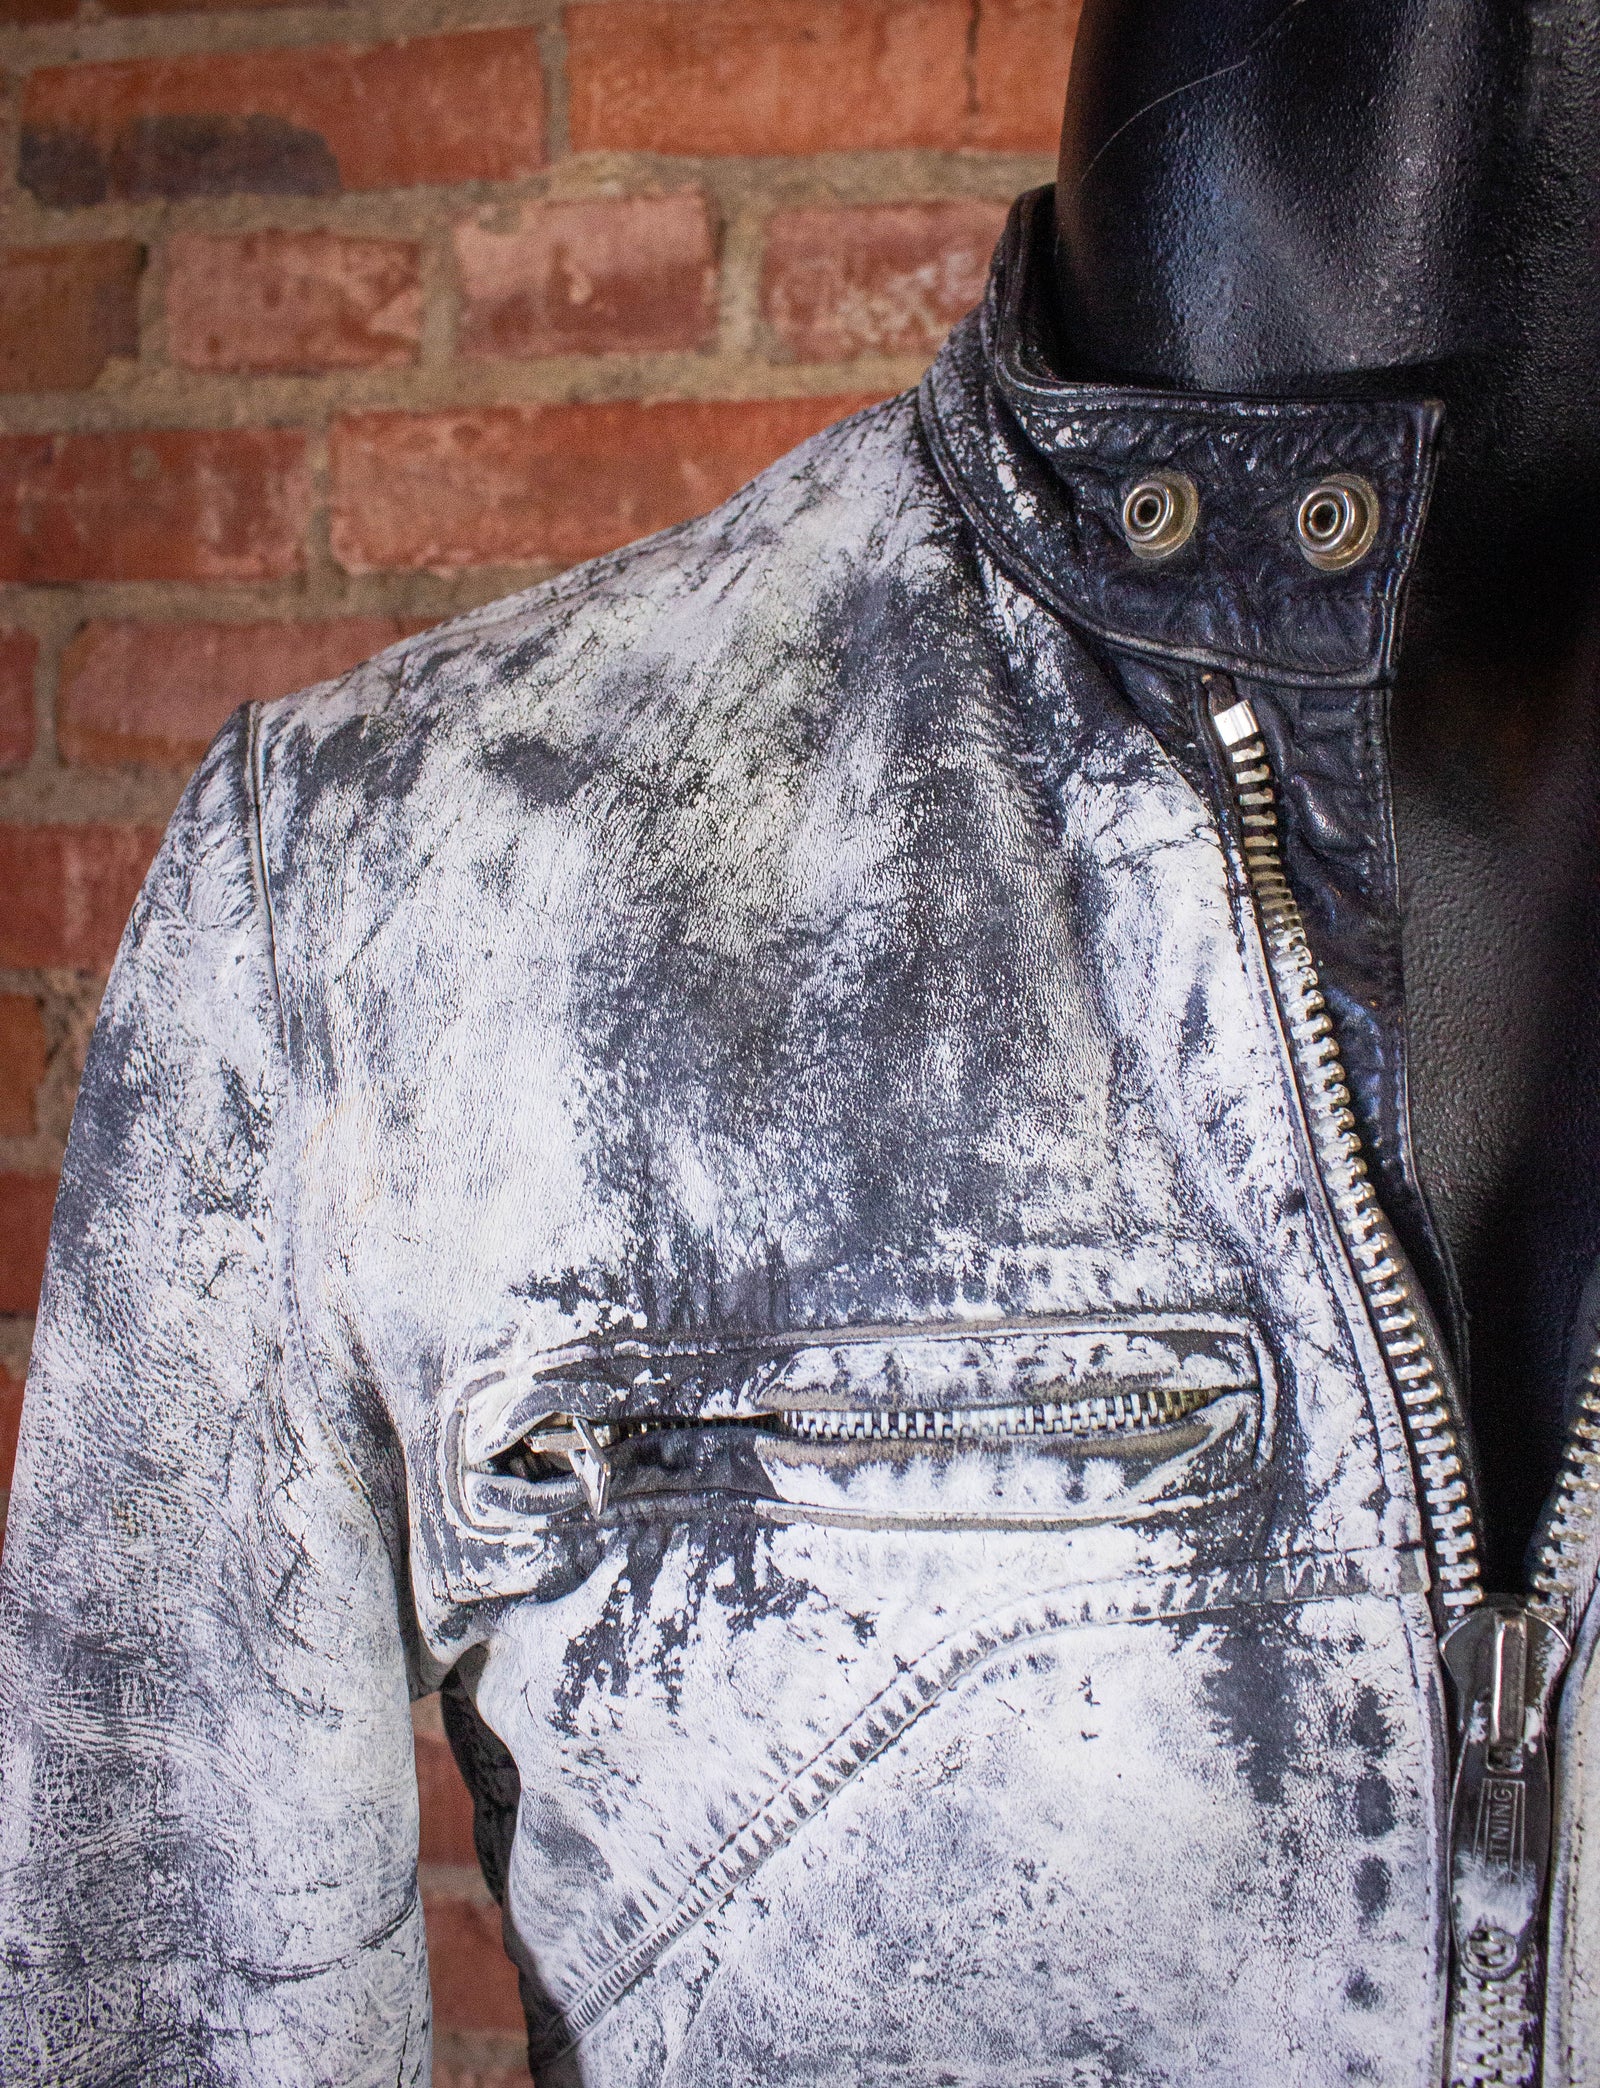 No Human is Supreme Leather Cafe Racer Jacket by Dead End Career